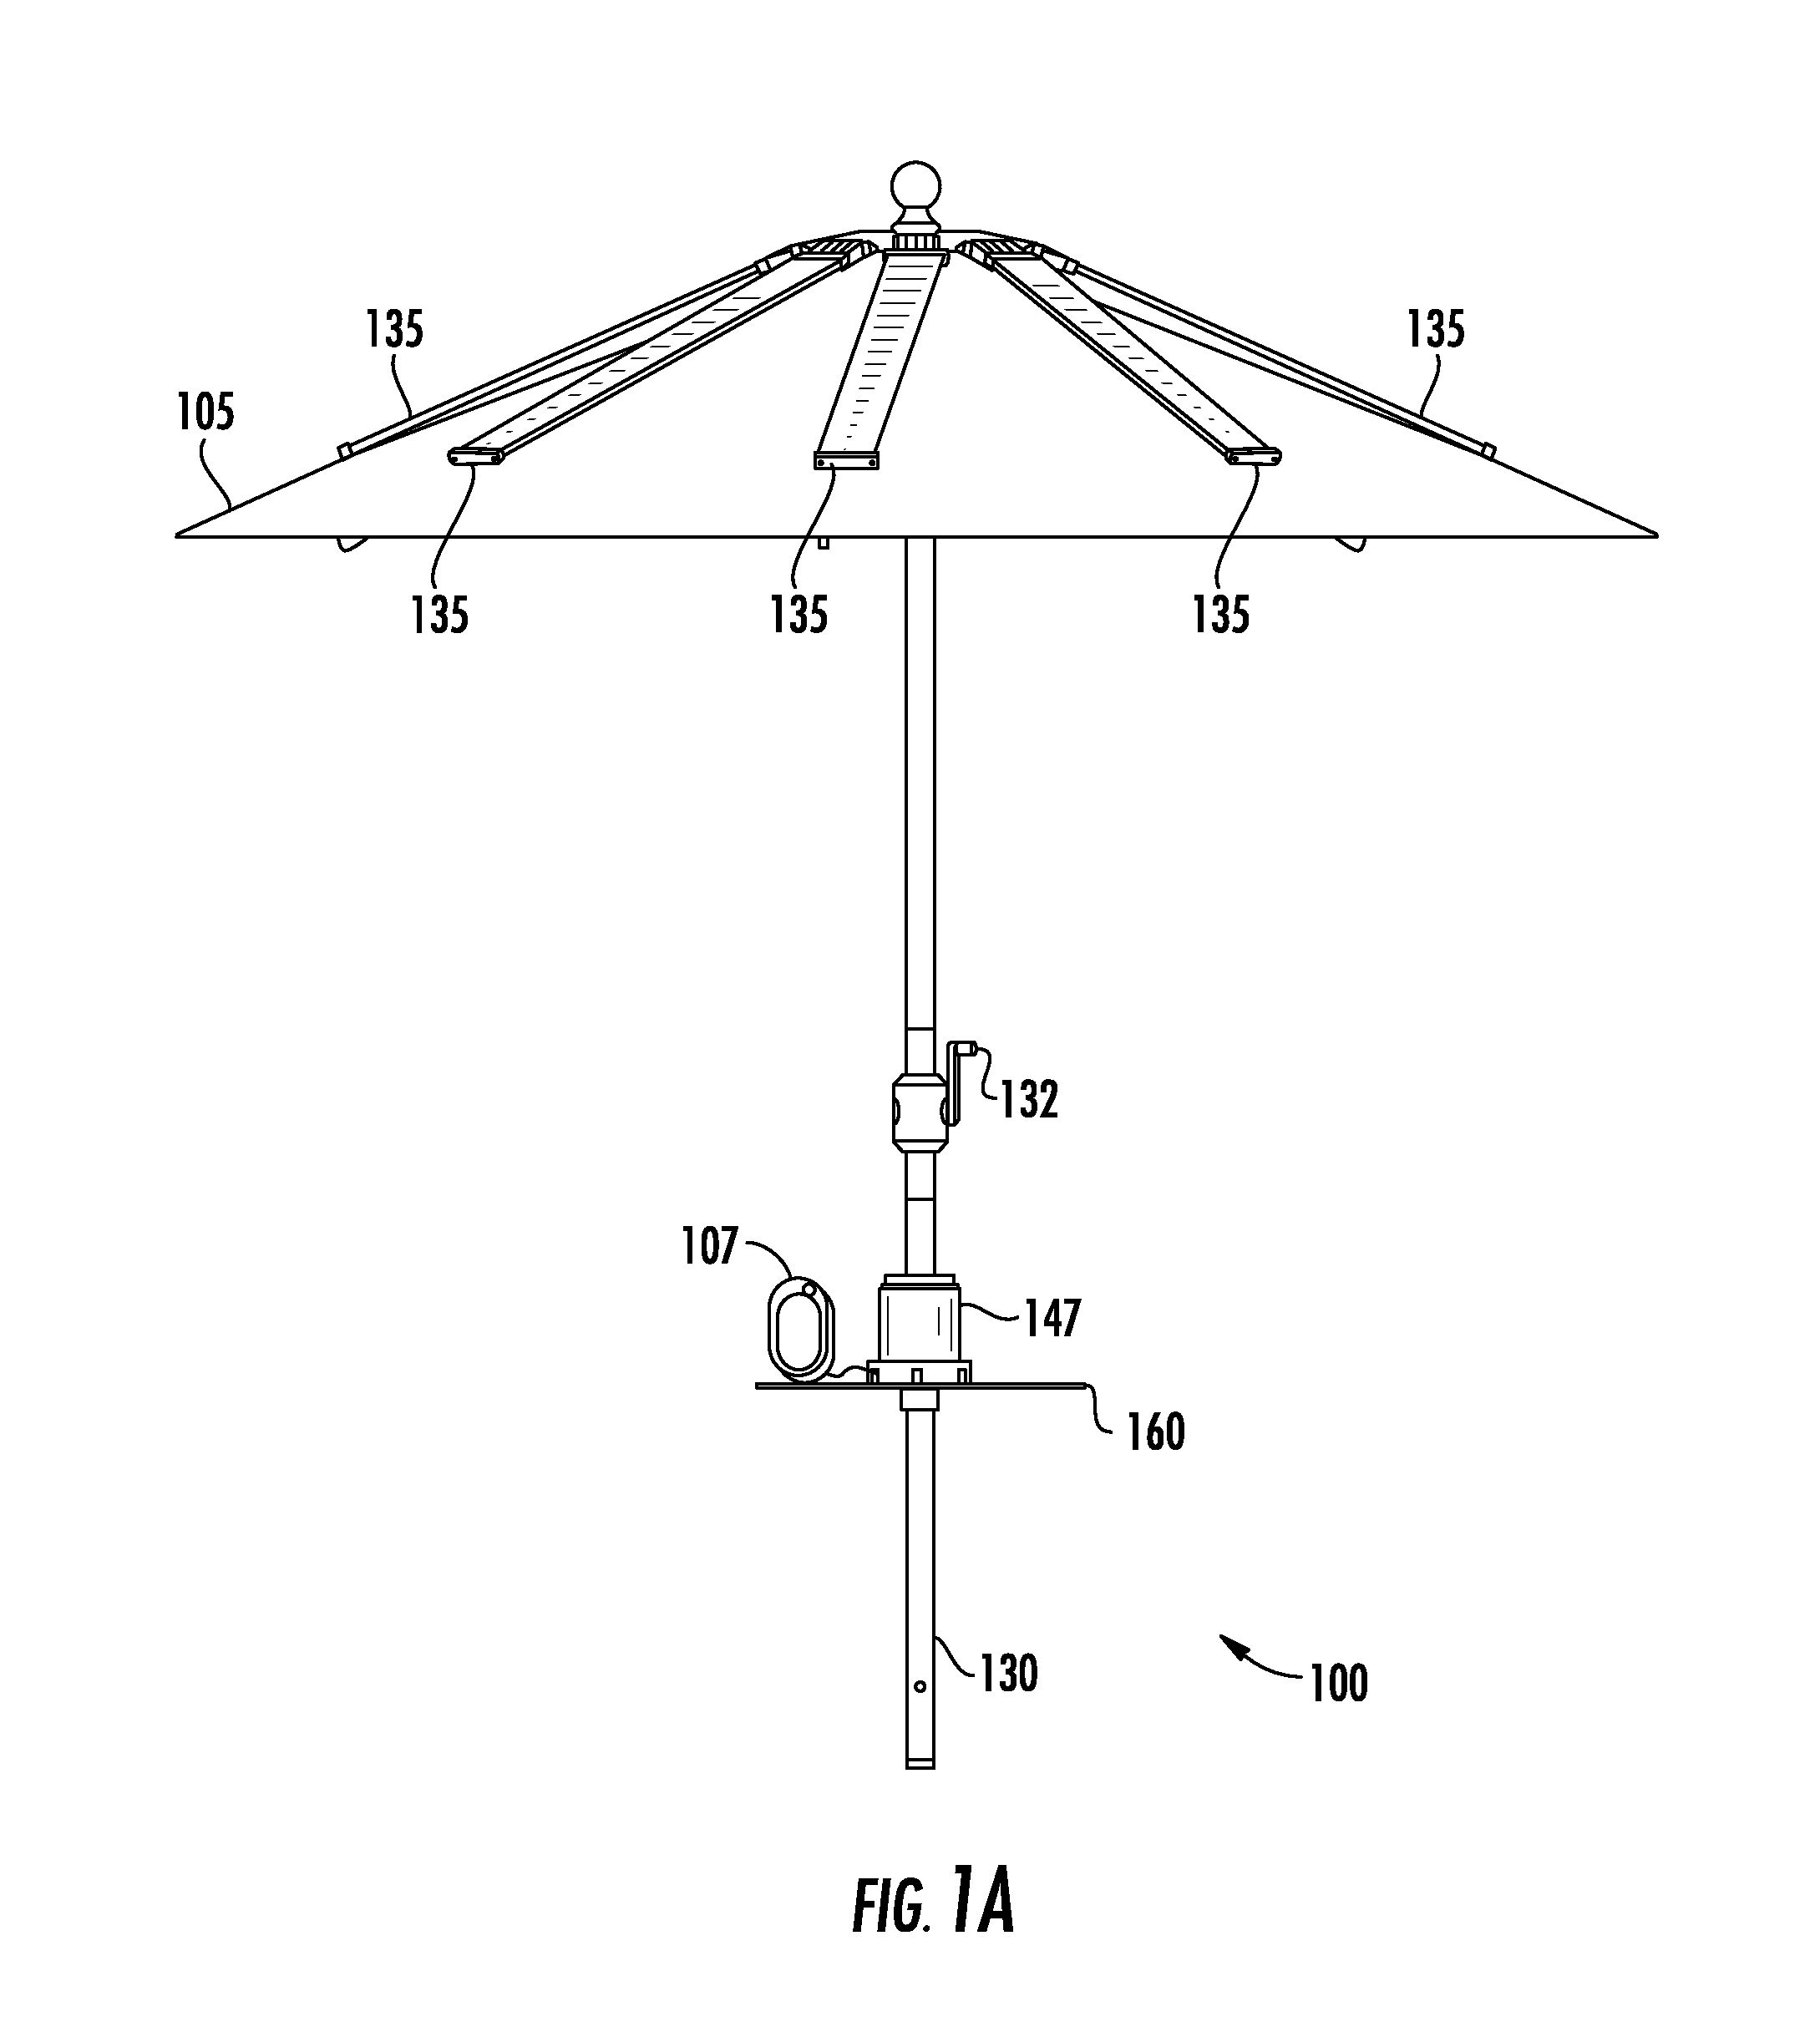 Sunshades with solar power supplies for charging electronic devices